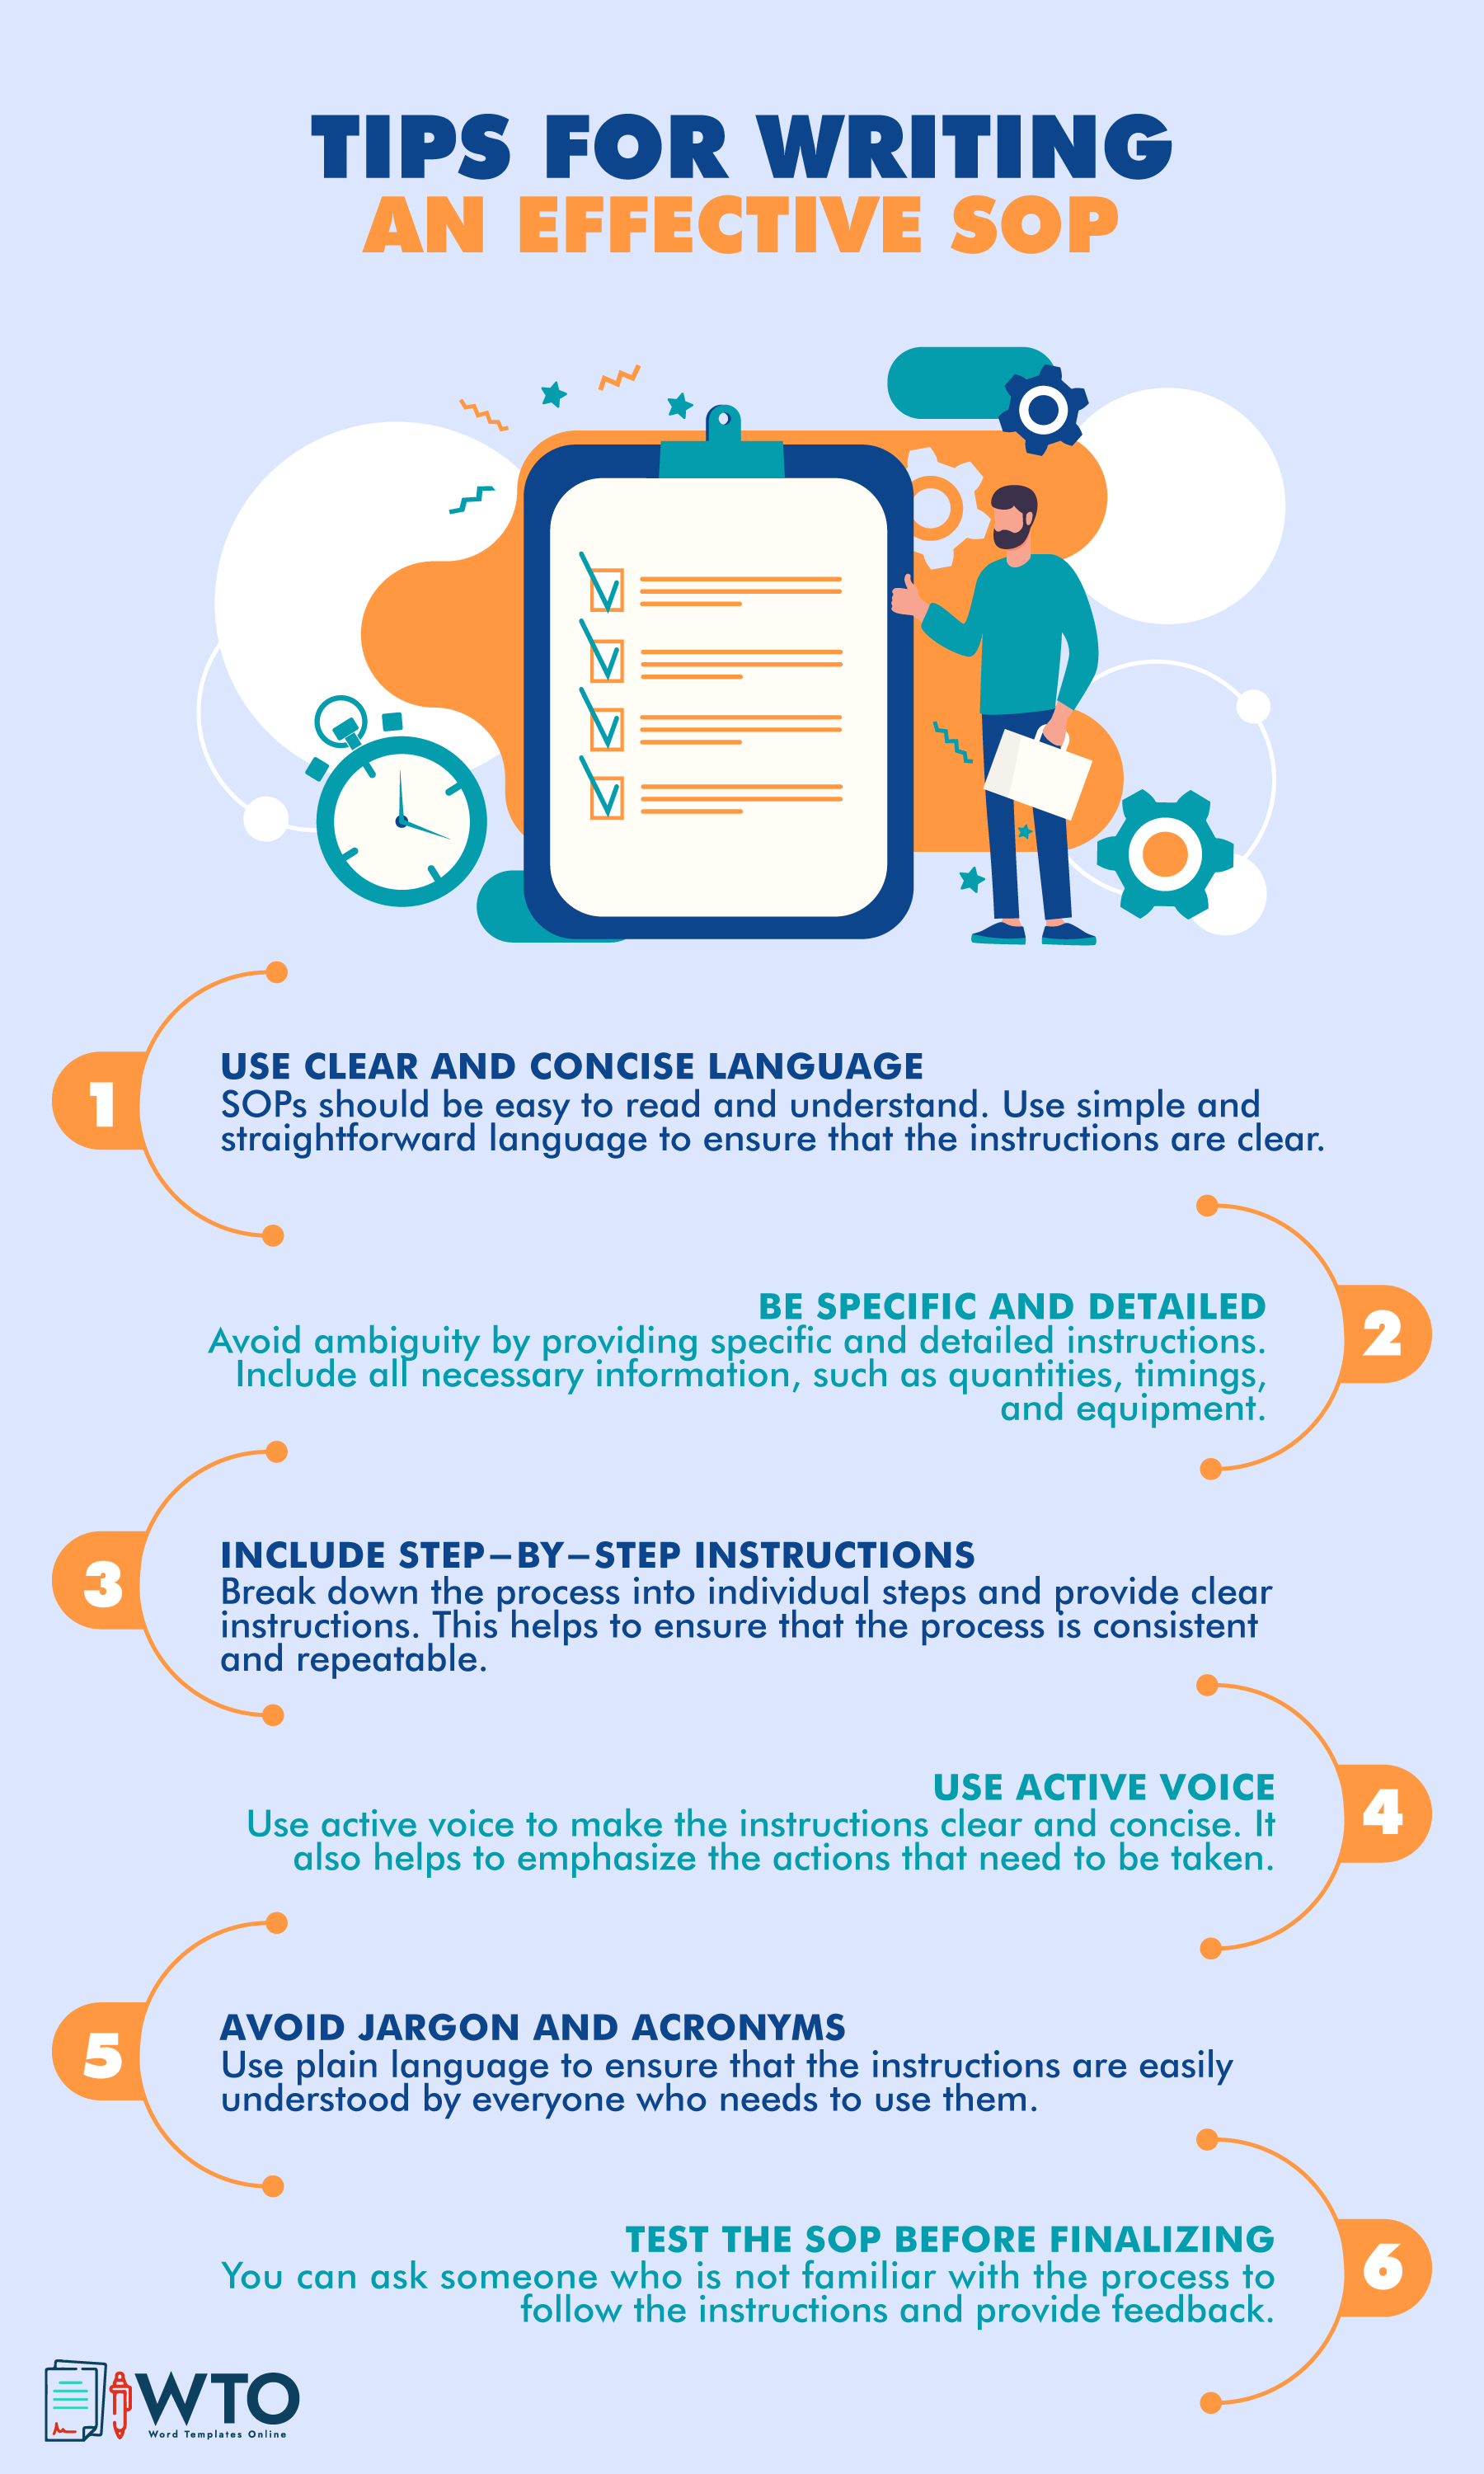 This infographic is about tips for writing an effective SOP.